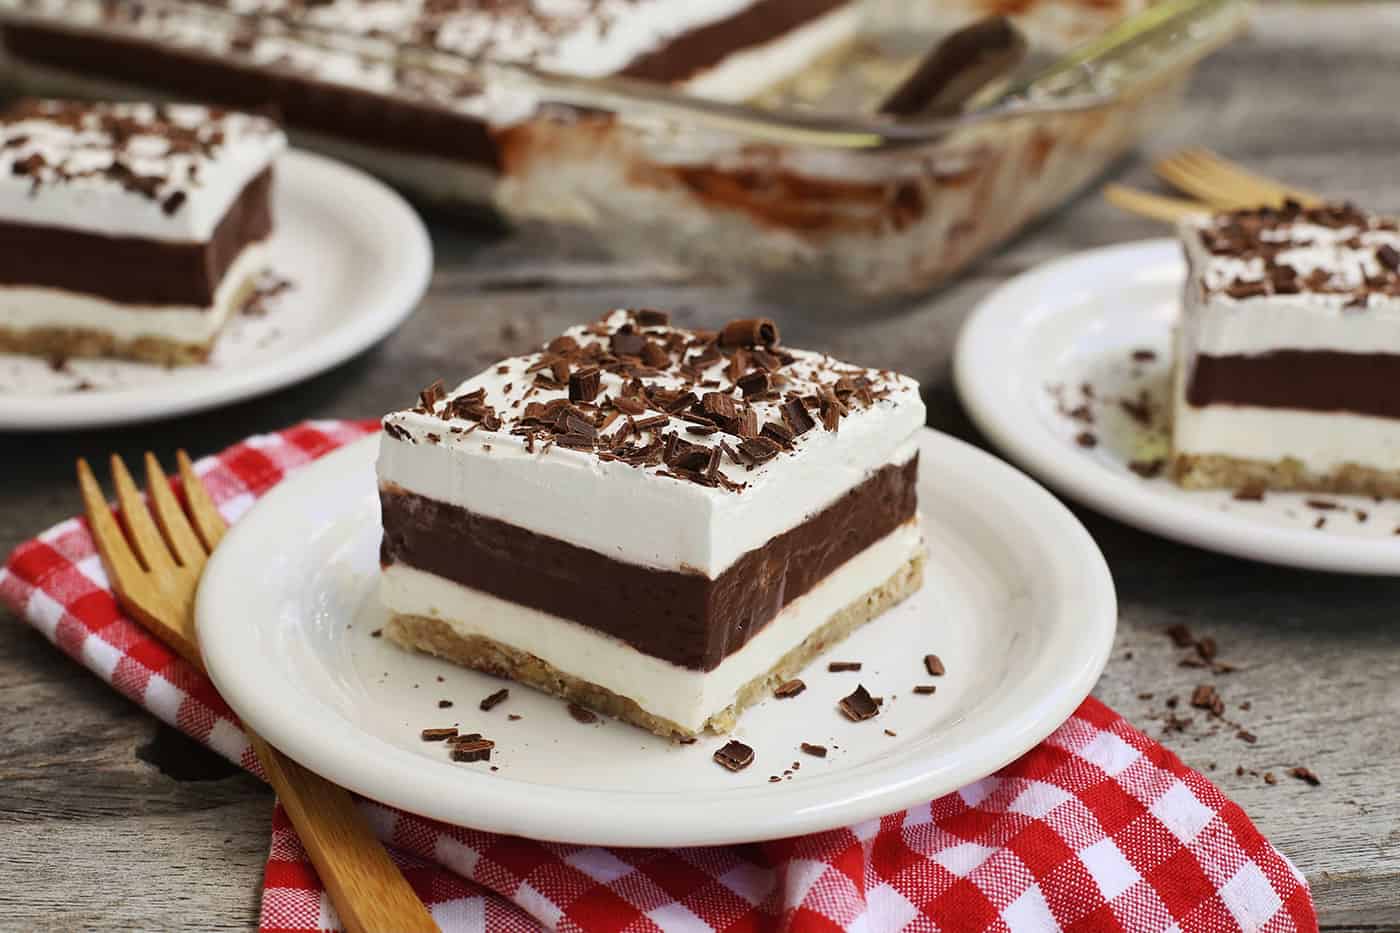 Three slices of layered pudding on plates